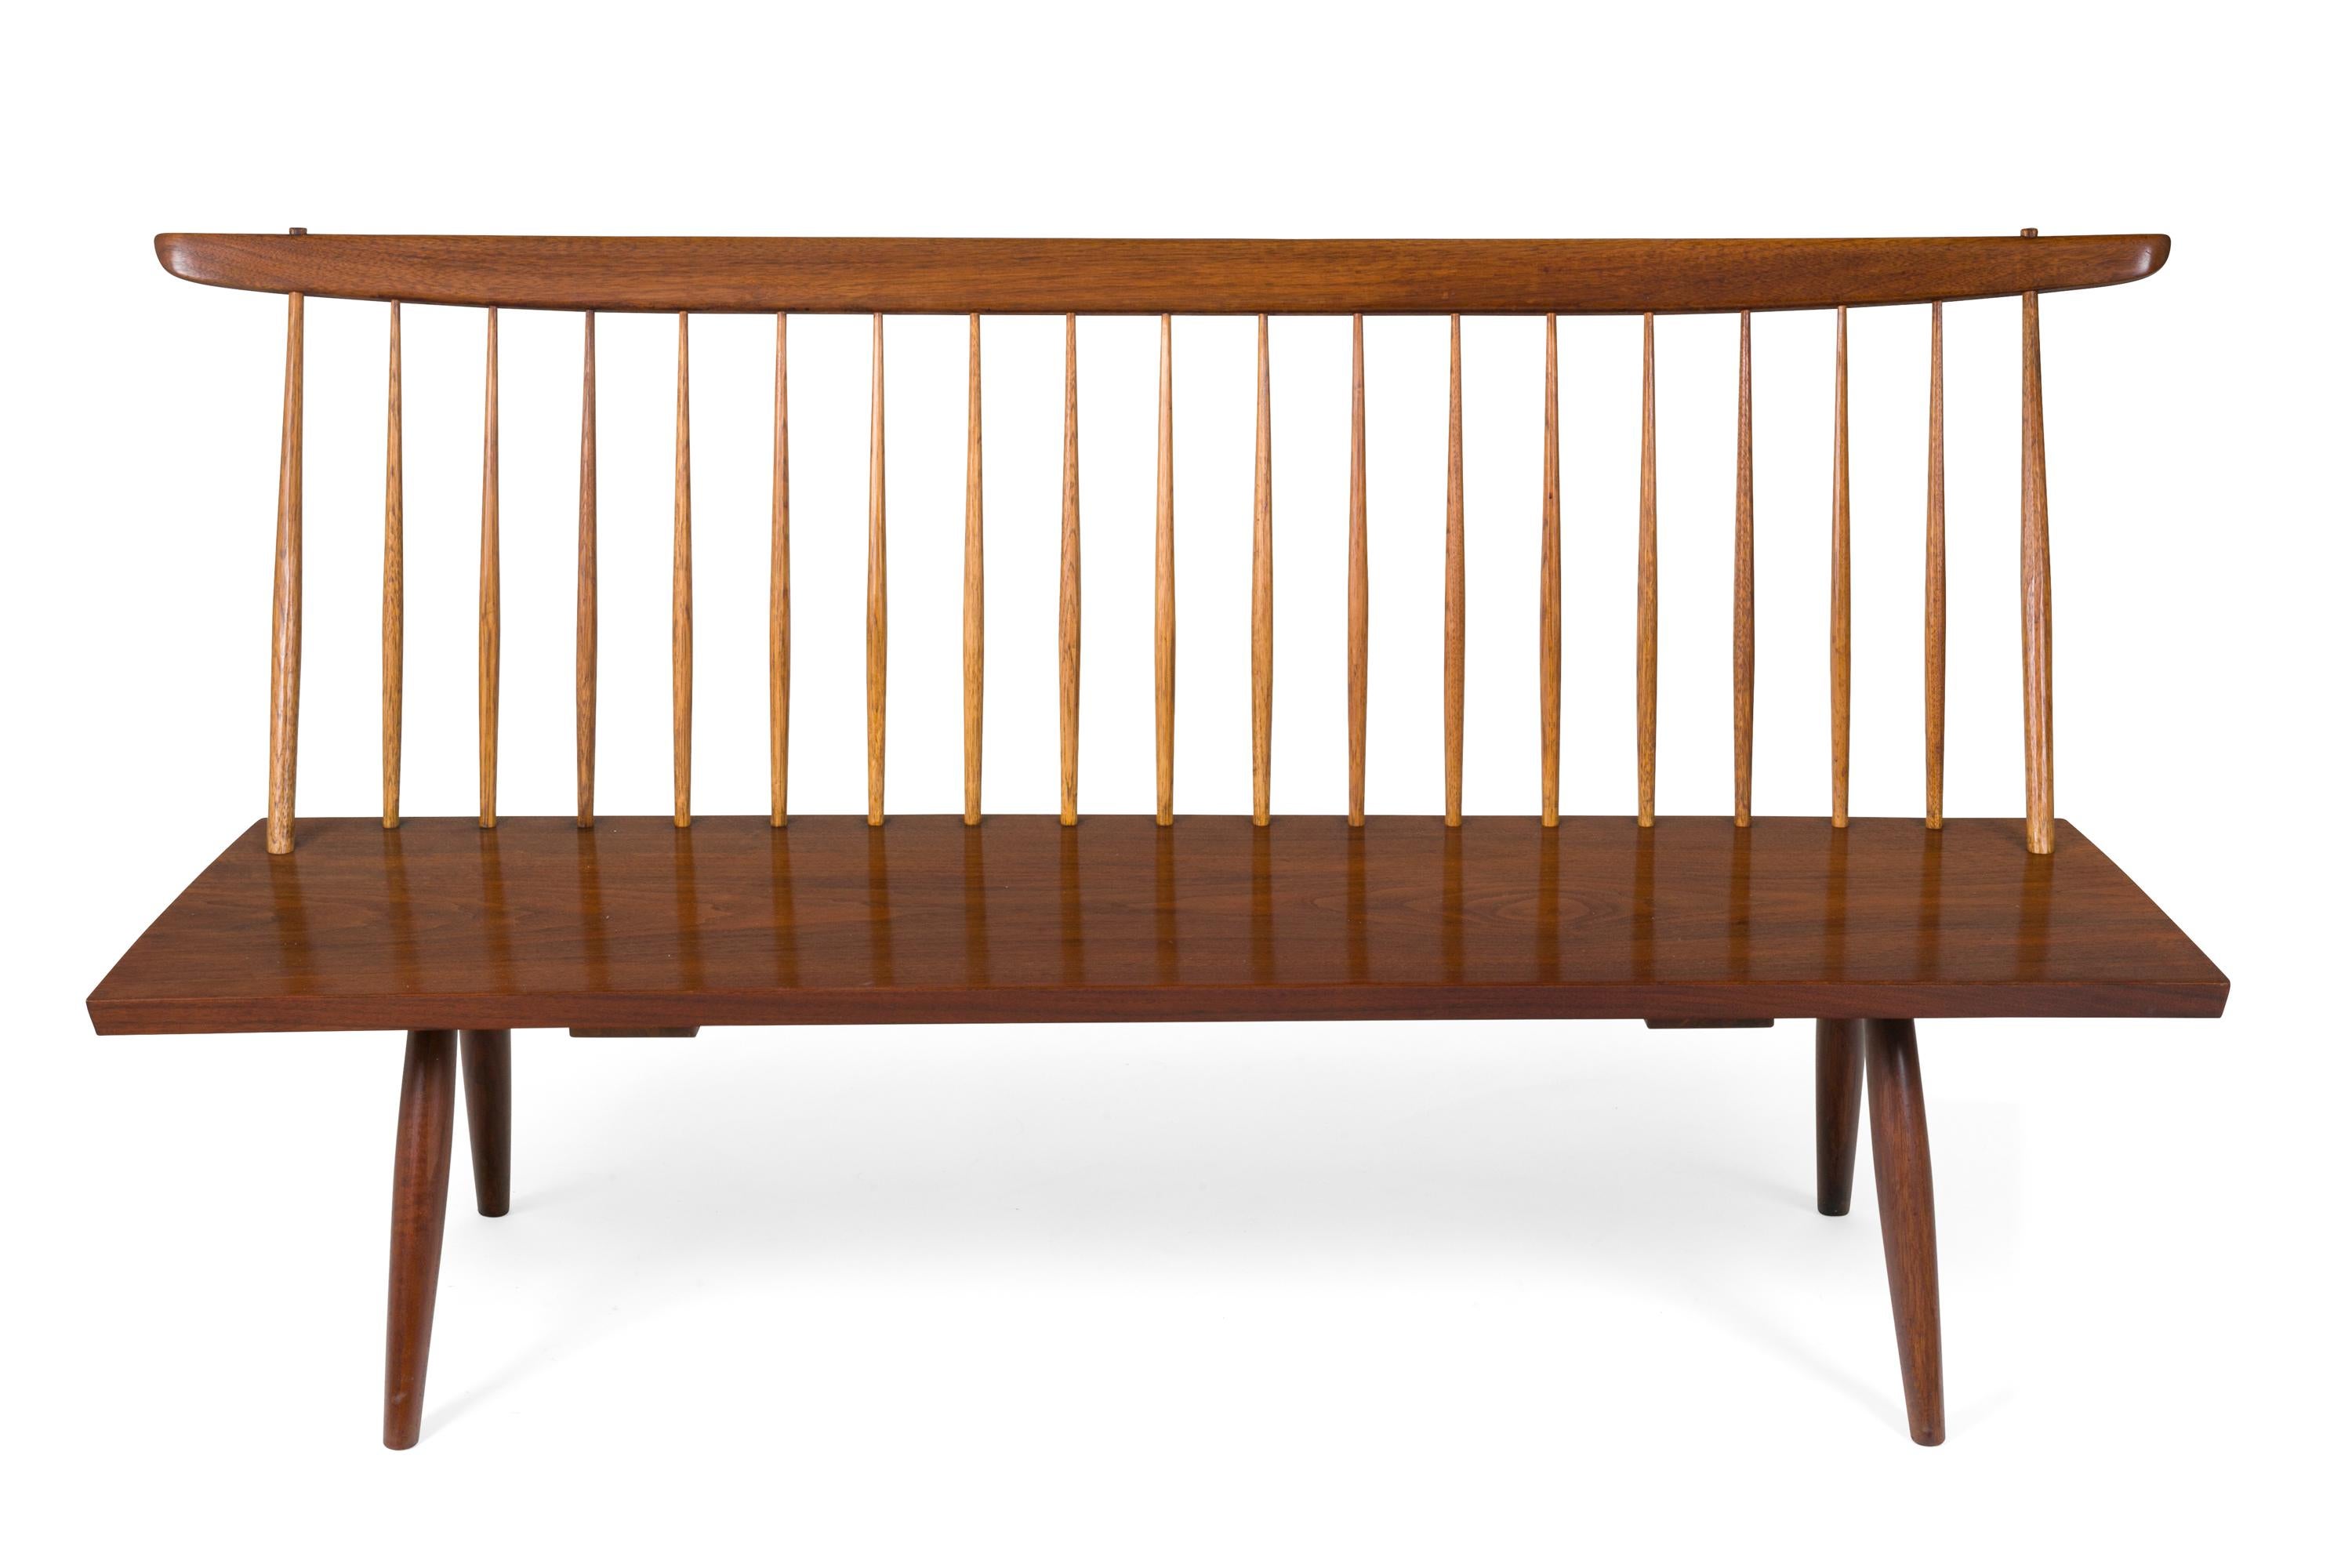 This bench has become an iconic example of George Nakashima's early work. A Classic simple design with shaker influences.